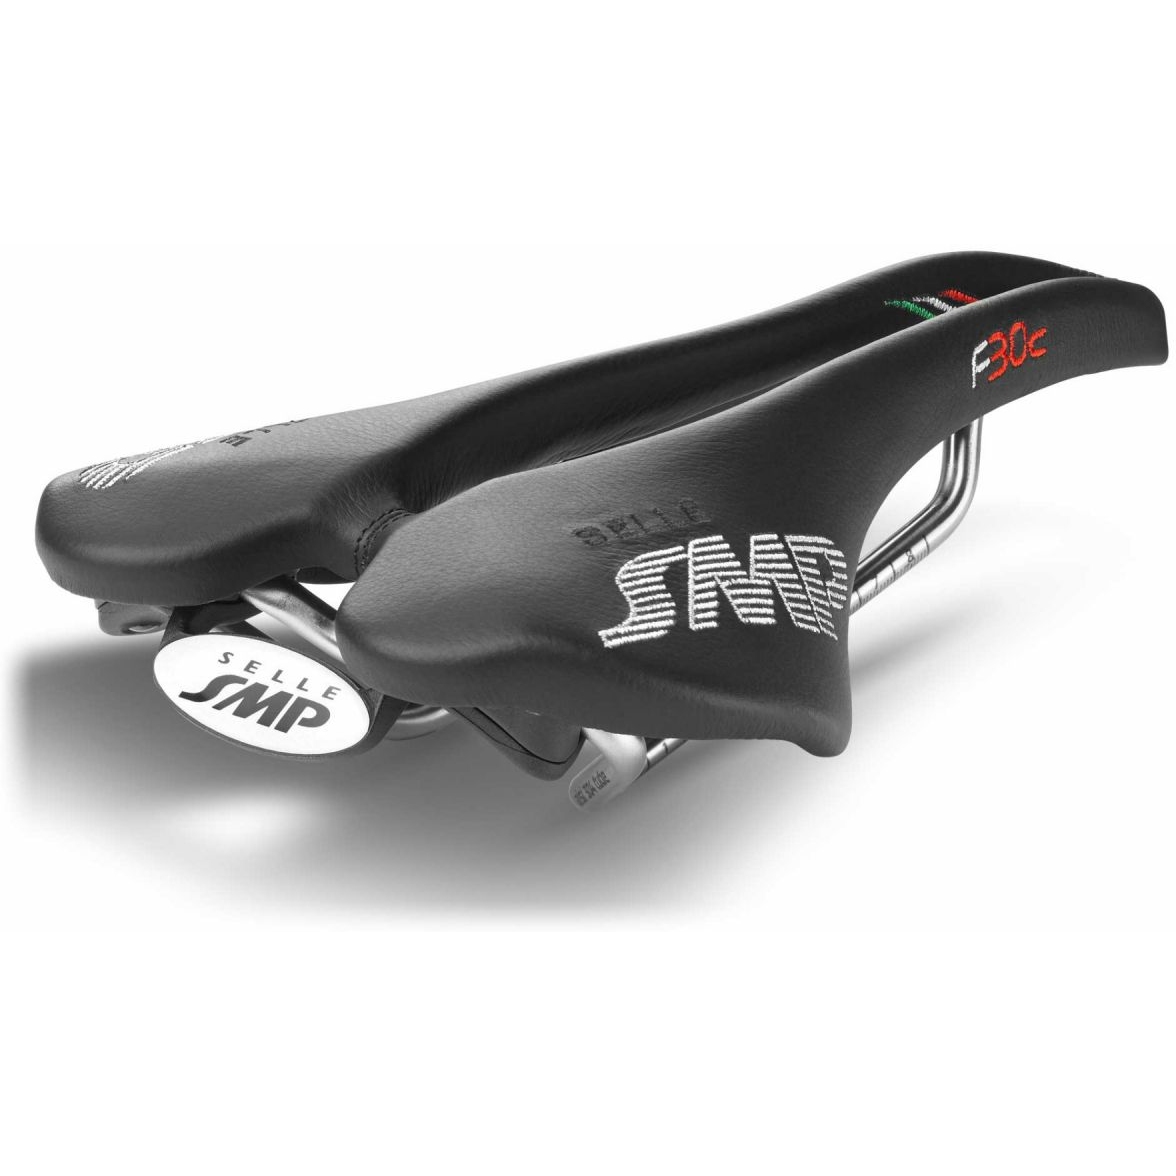 Picture of Selle SMP F30c Saddle - black